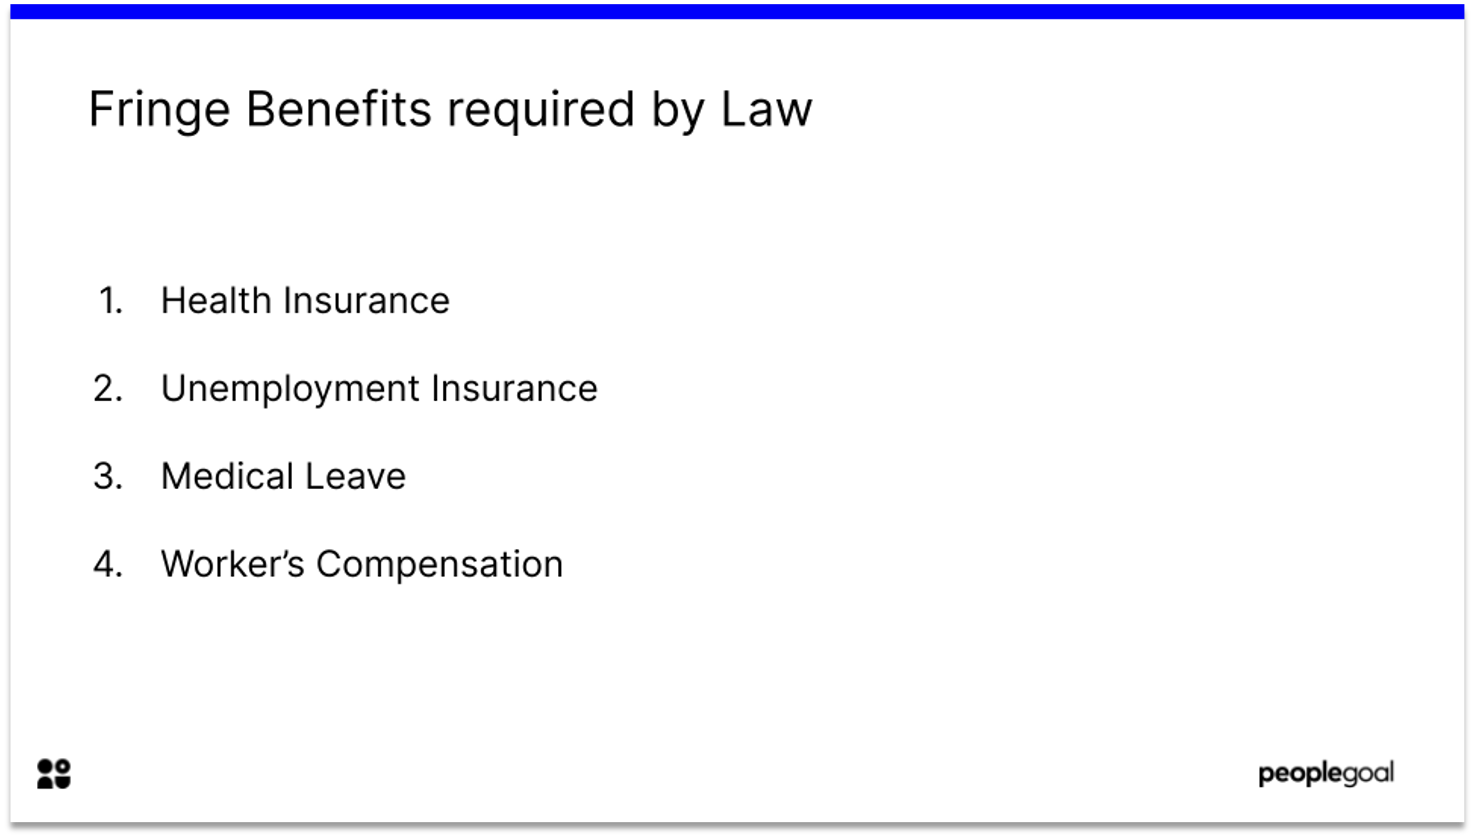 Fringe Benefits required by law